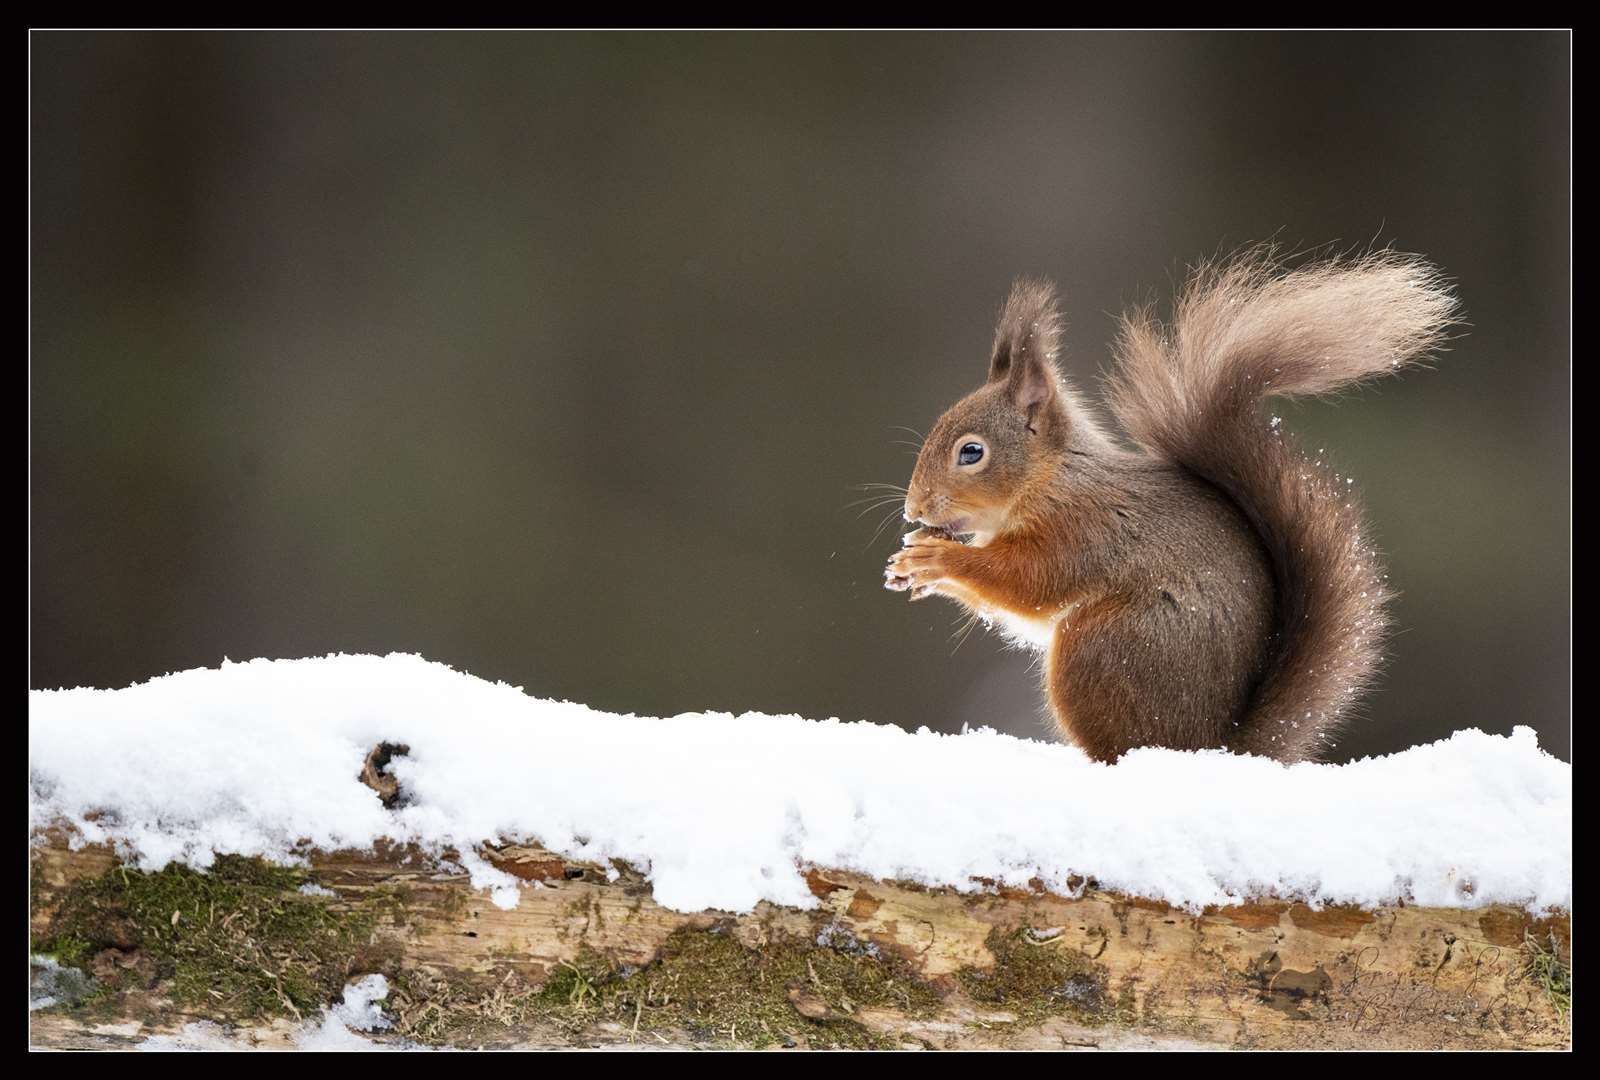 This squirrel was caught enjoying the snow by Christopher Reid.